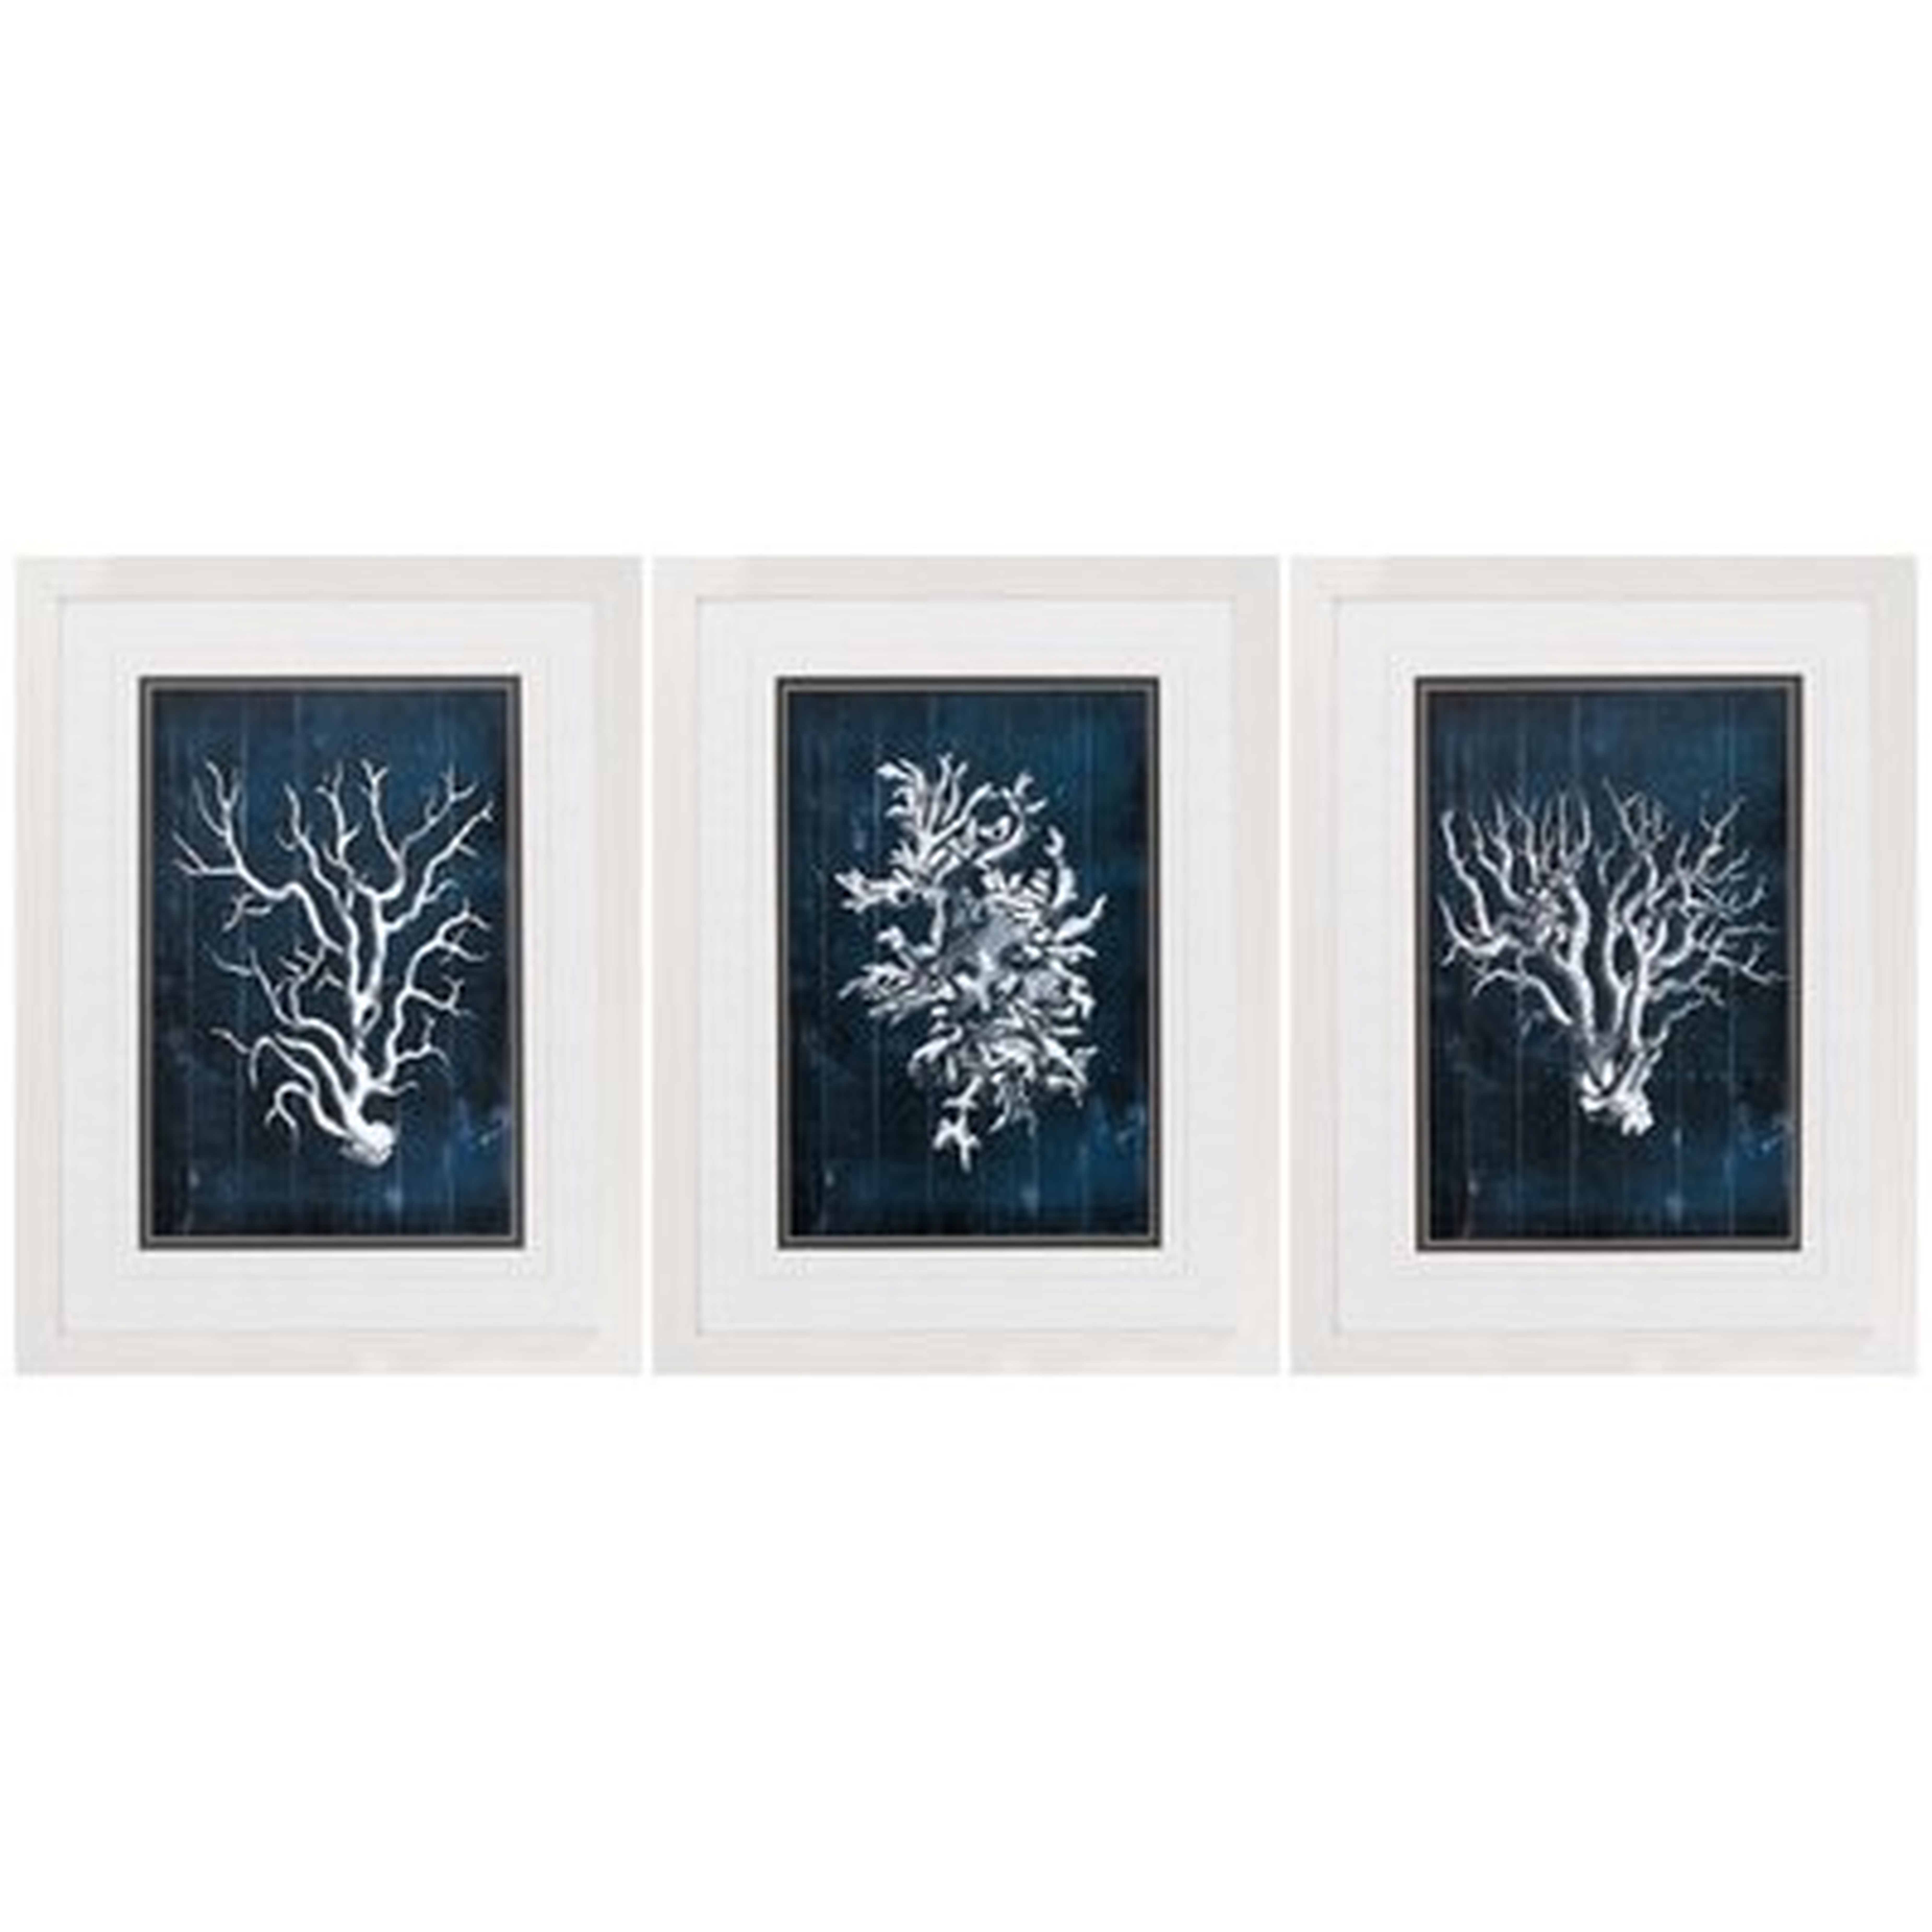 Wood Coral - 3 Piece Picture Frame Graphic Art Print Set on Paper - Birch Lane